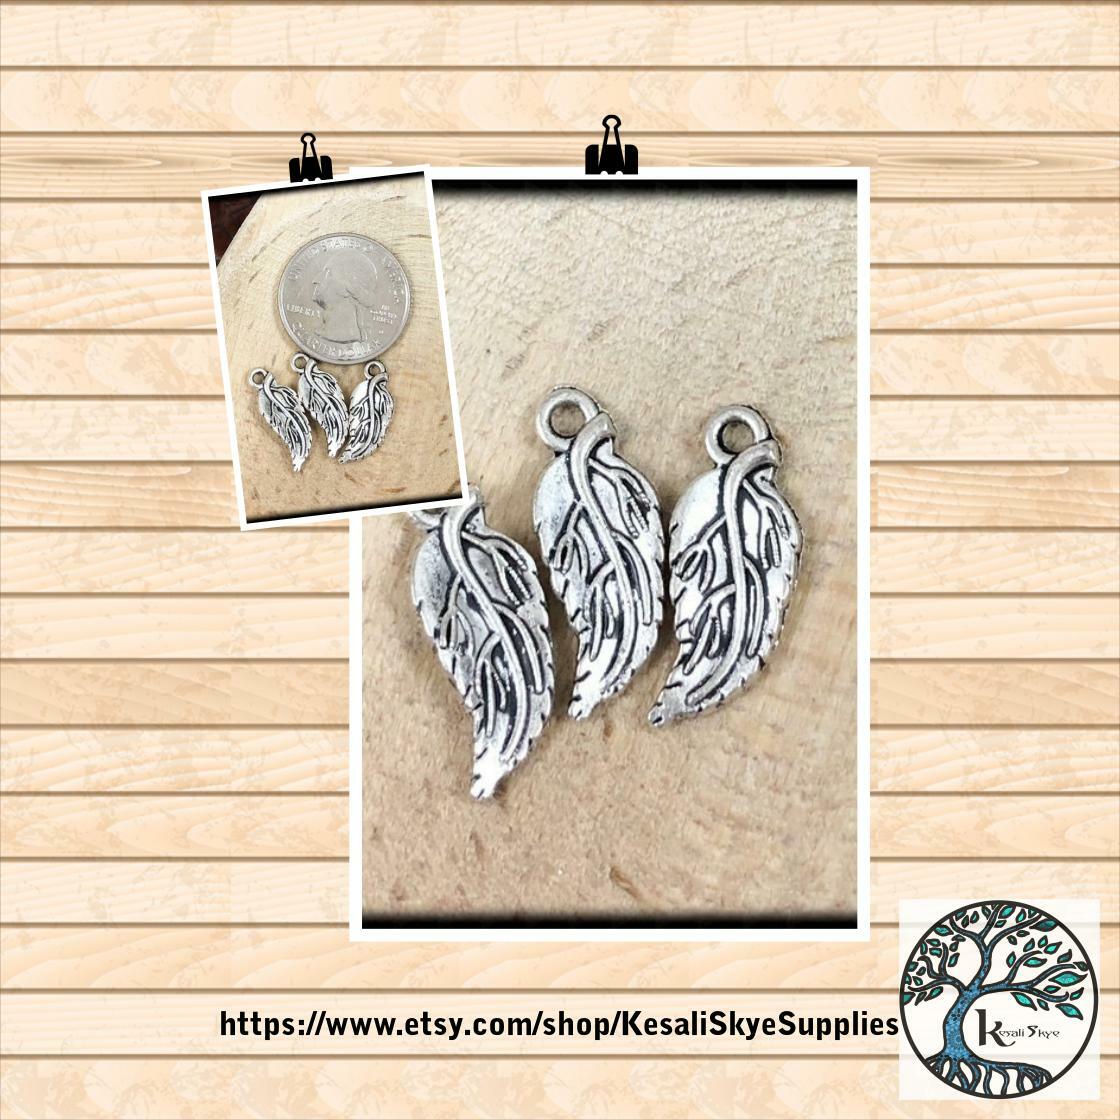 🐣. Offer Xtras! 10 Pcs, 19x7mm, Silver Charms, Silver Pendants, Antiqued Silver, Embossed Leaf, Leave Charms, Leaves, Silver Leaves, Nature Charms, Leaf for $2.55 #SilverCharms #19x7mm